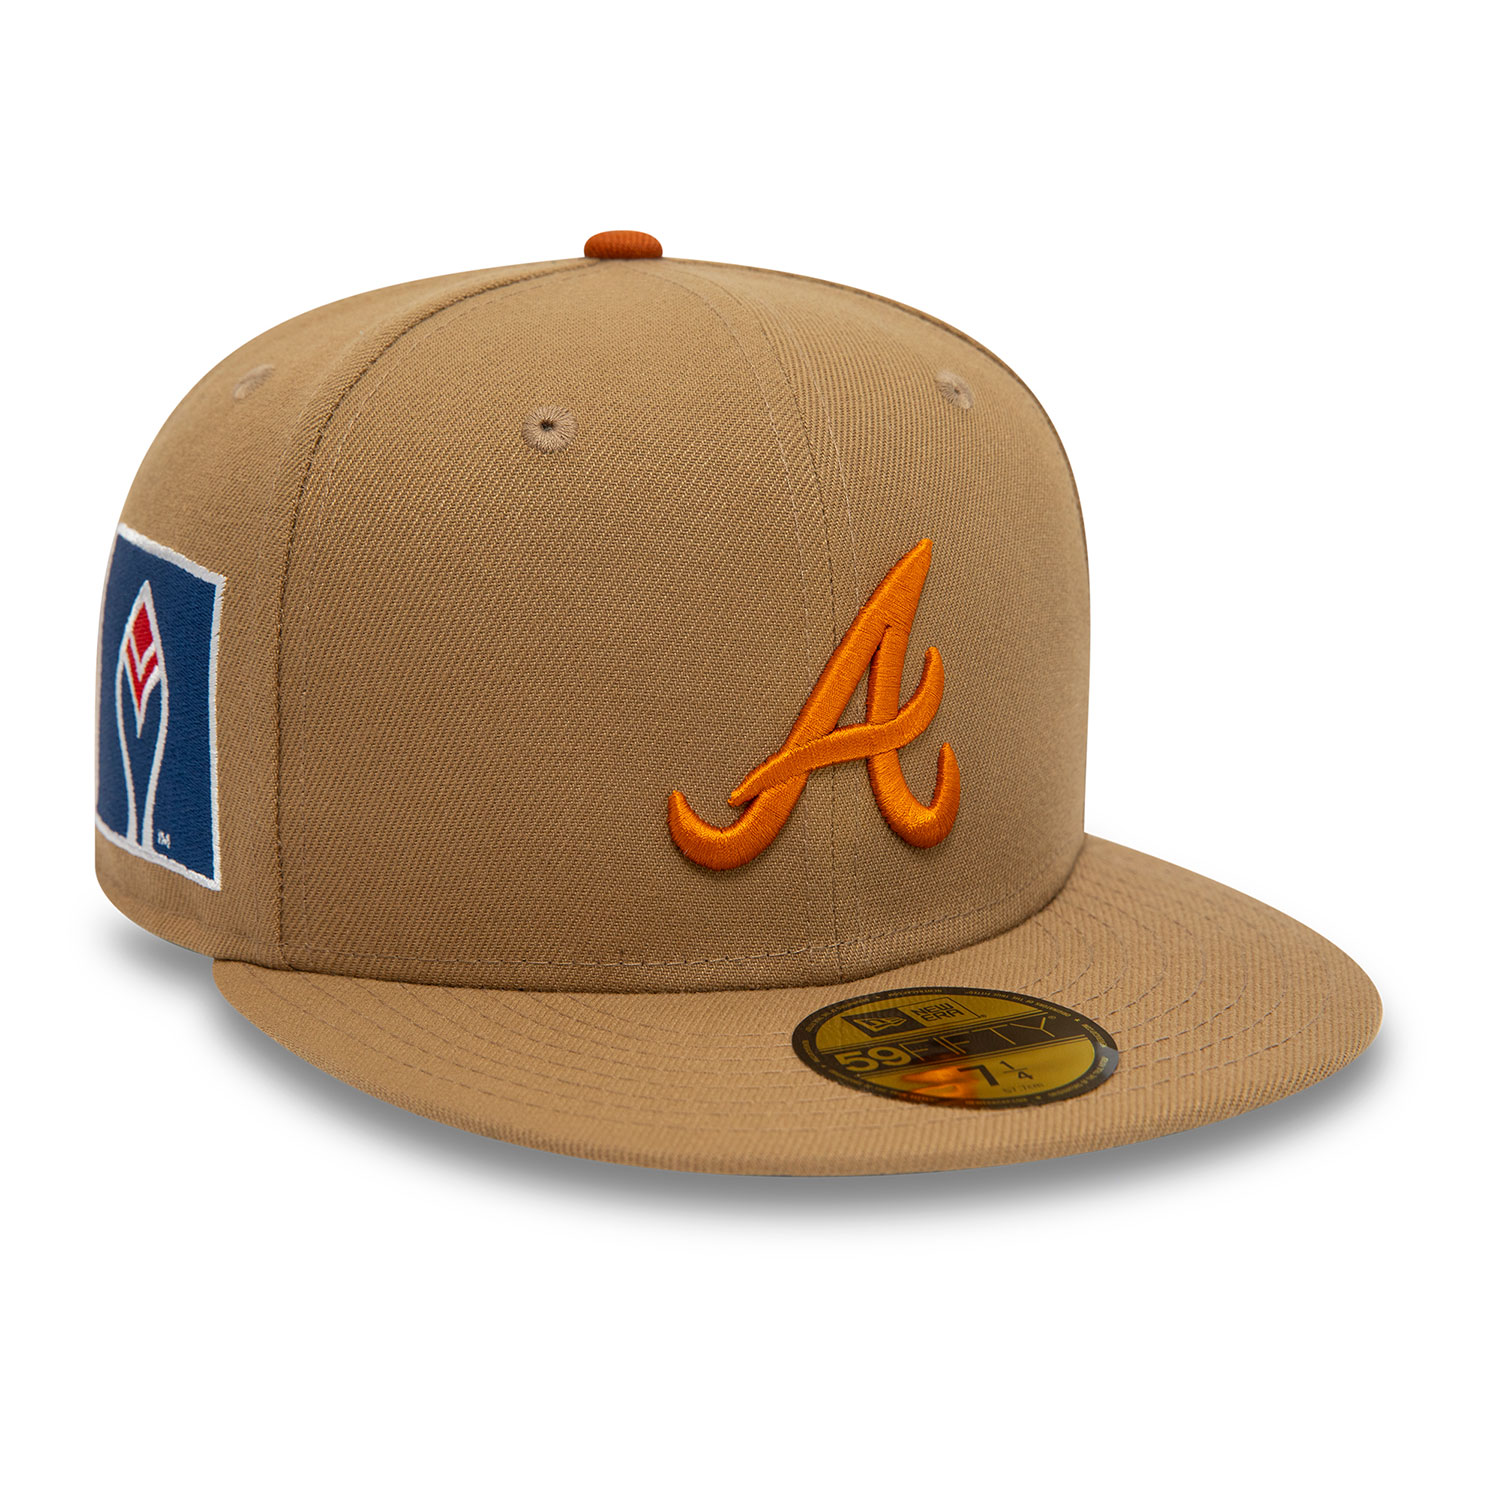 Official New Era MLB Fall Atlanta Braves Light Brown 59FIFTY Fitted Cap  B9633_945 B9633_945